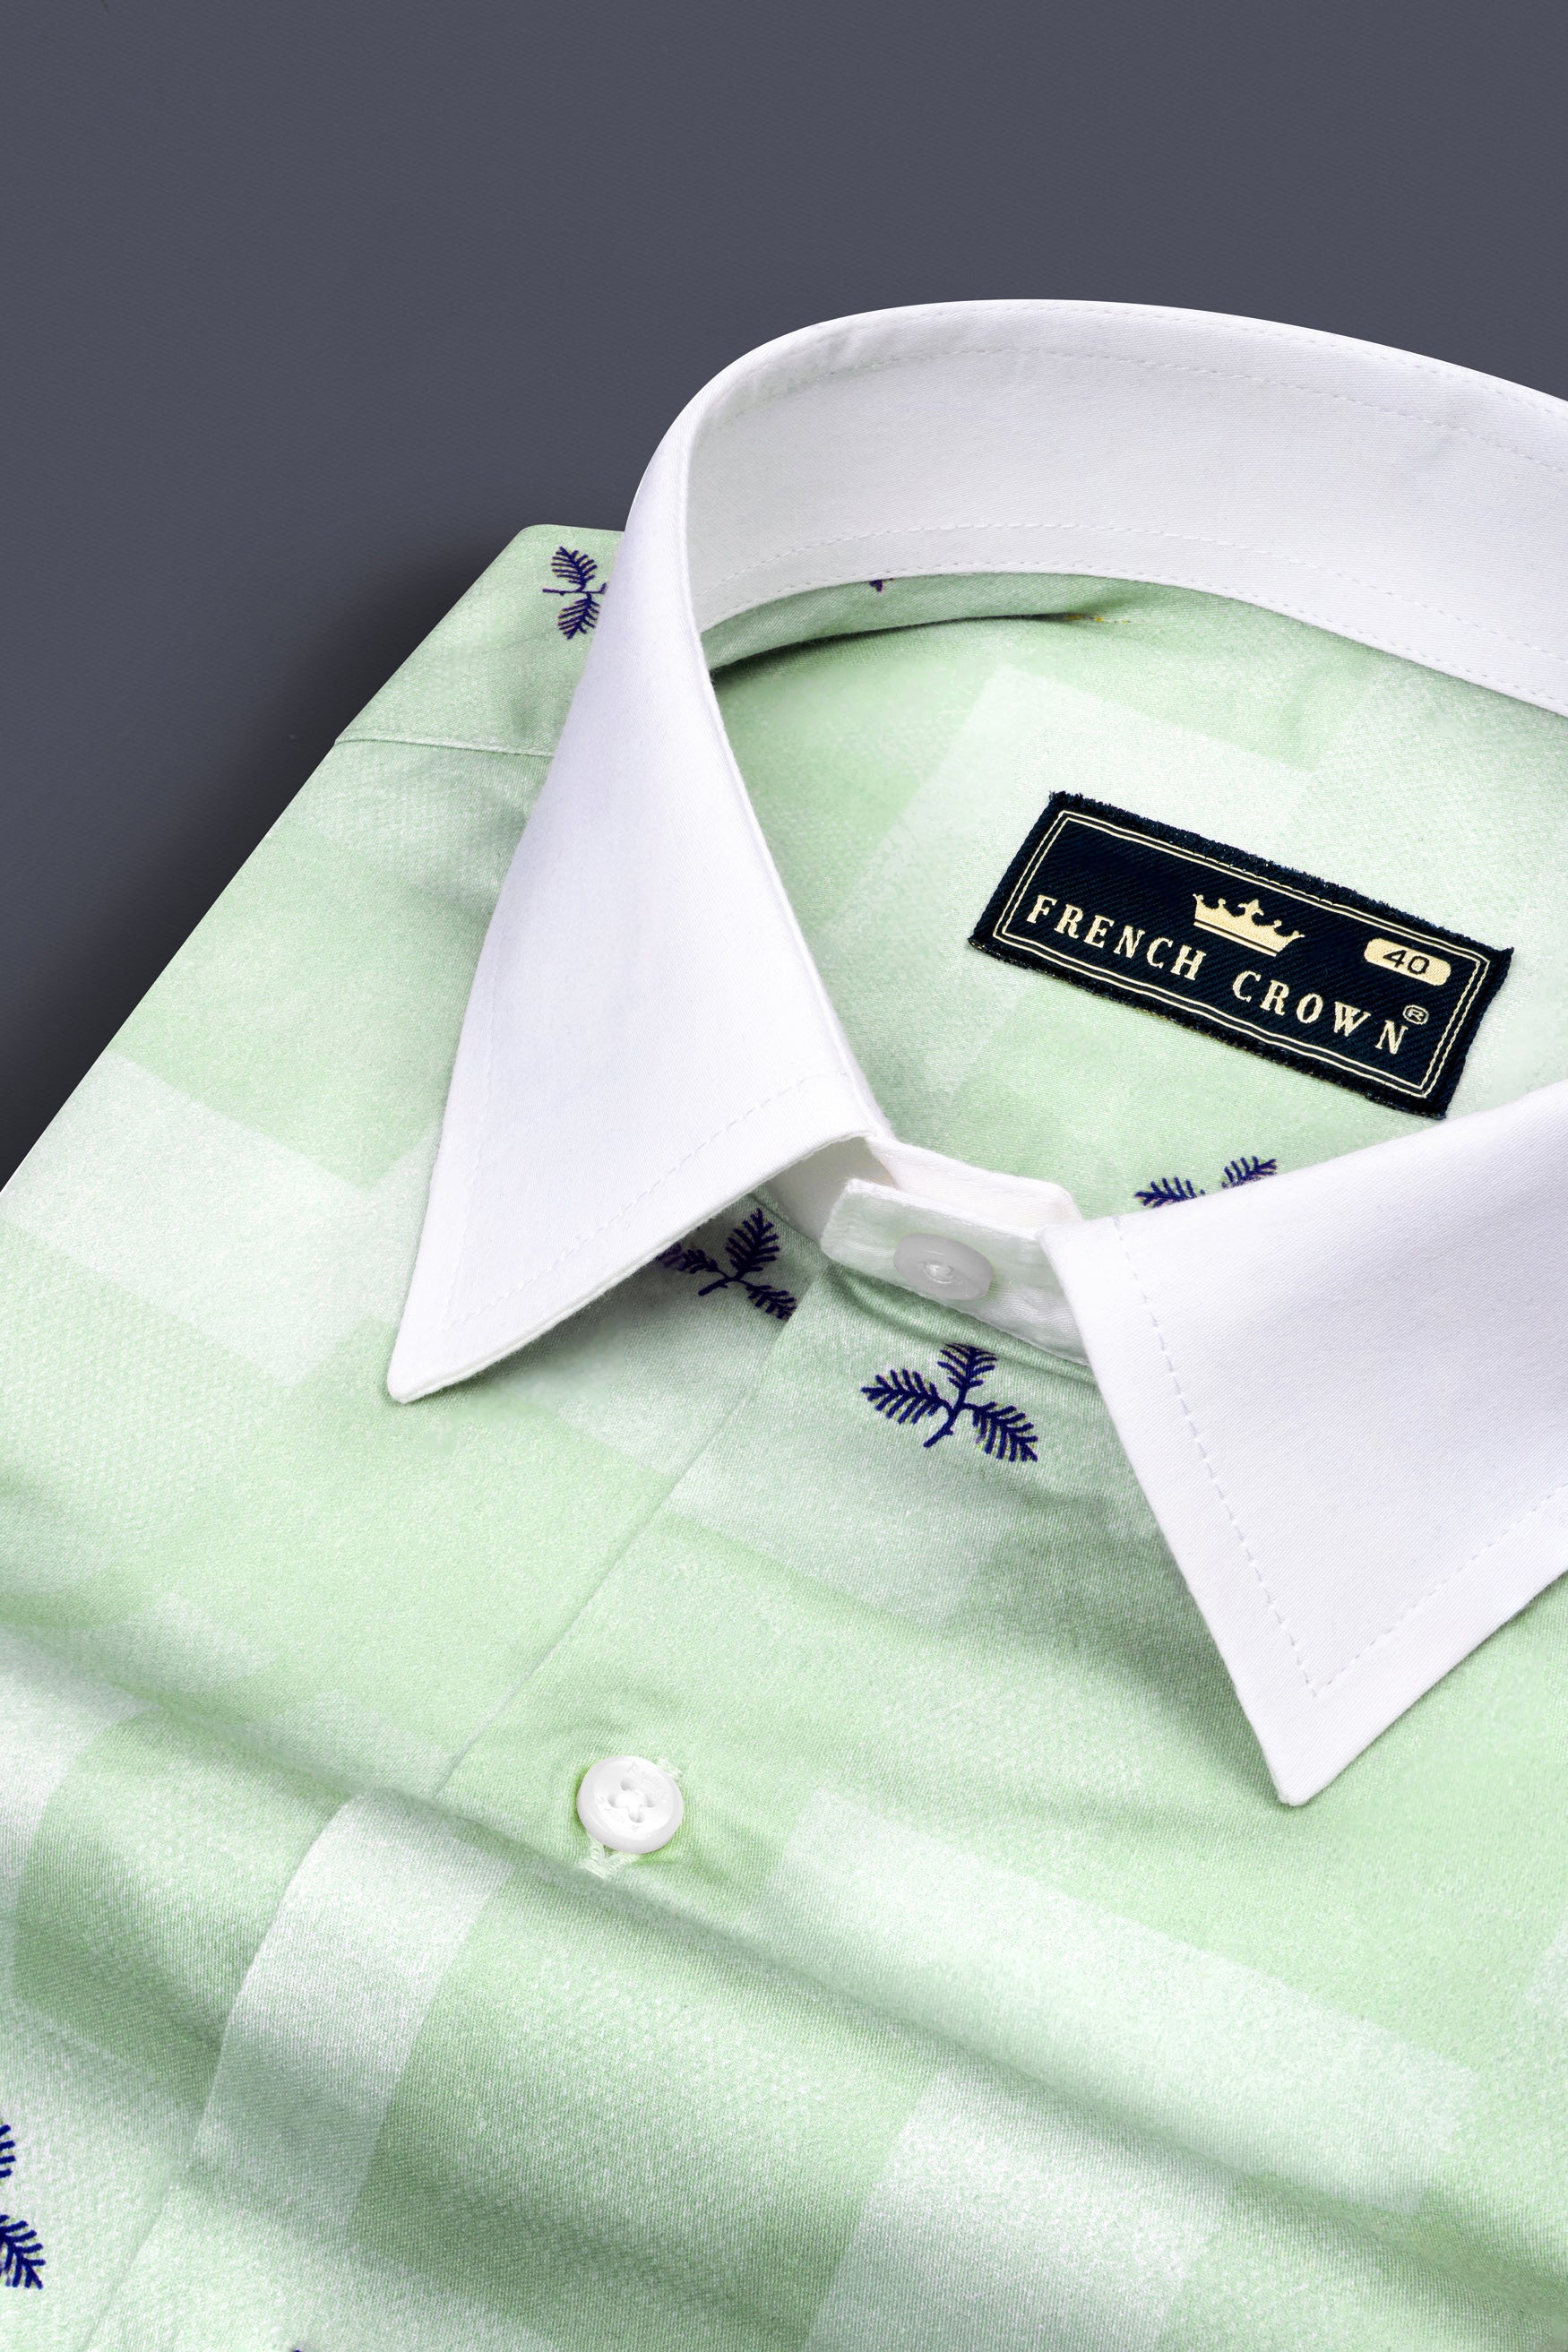 Fringy Green with Stratos blue leaves Printed Super Soft Premium Cotton Shirt